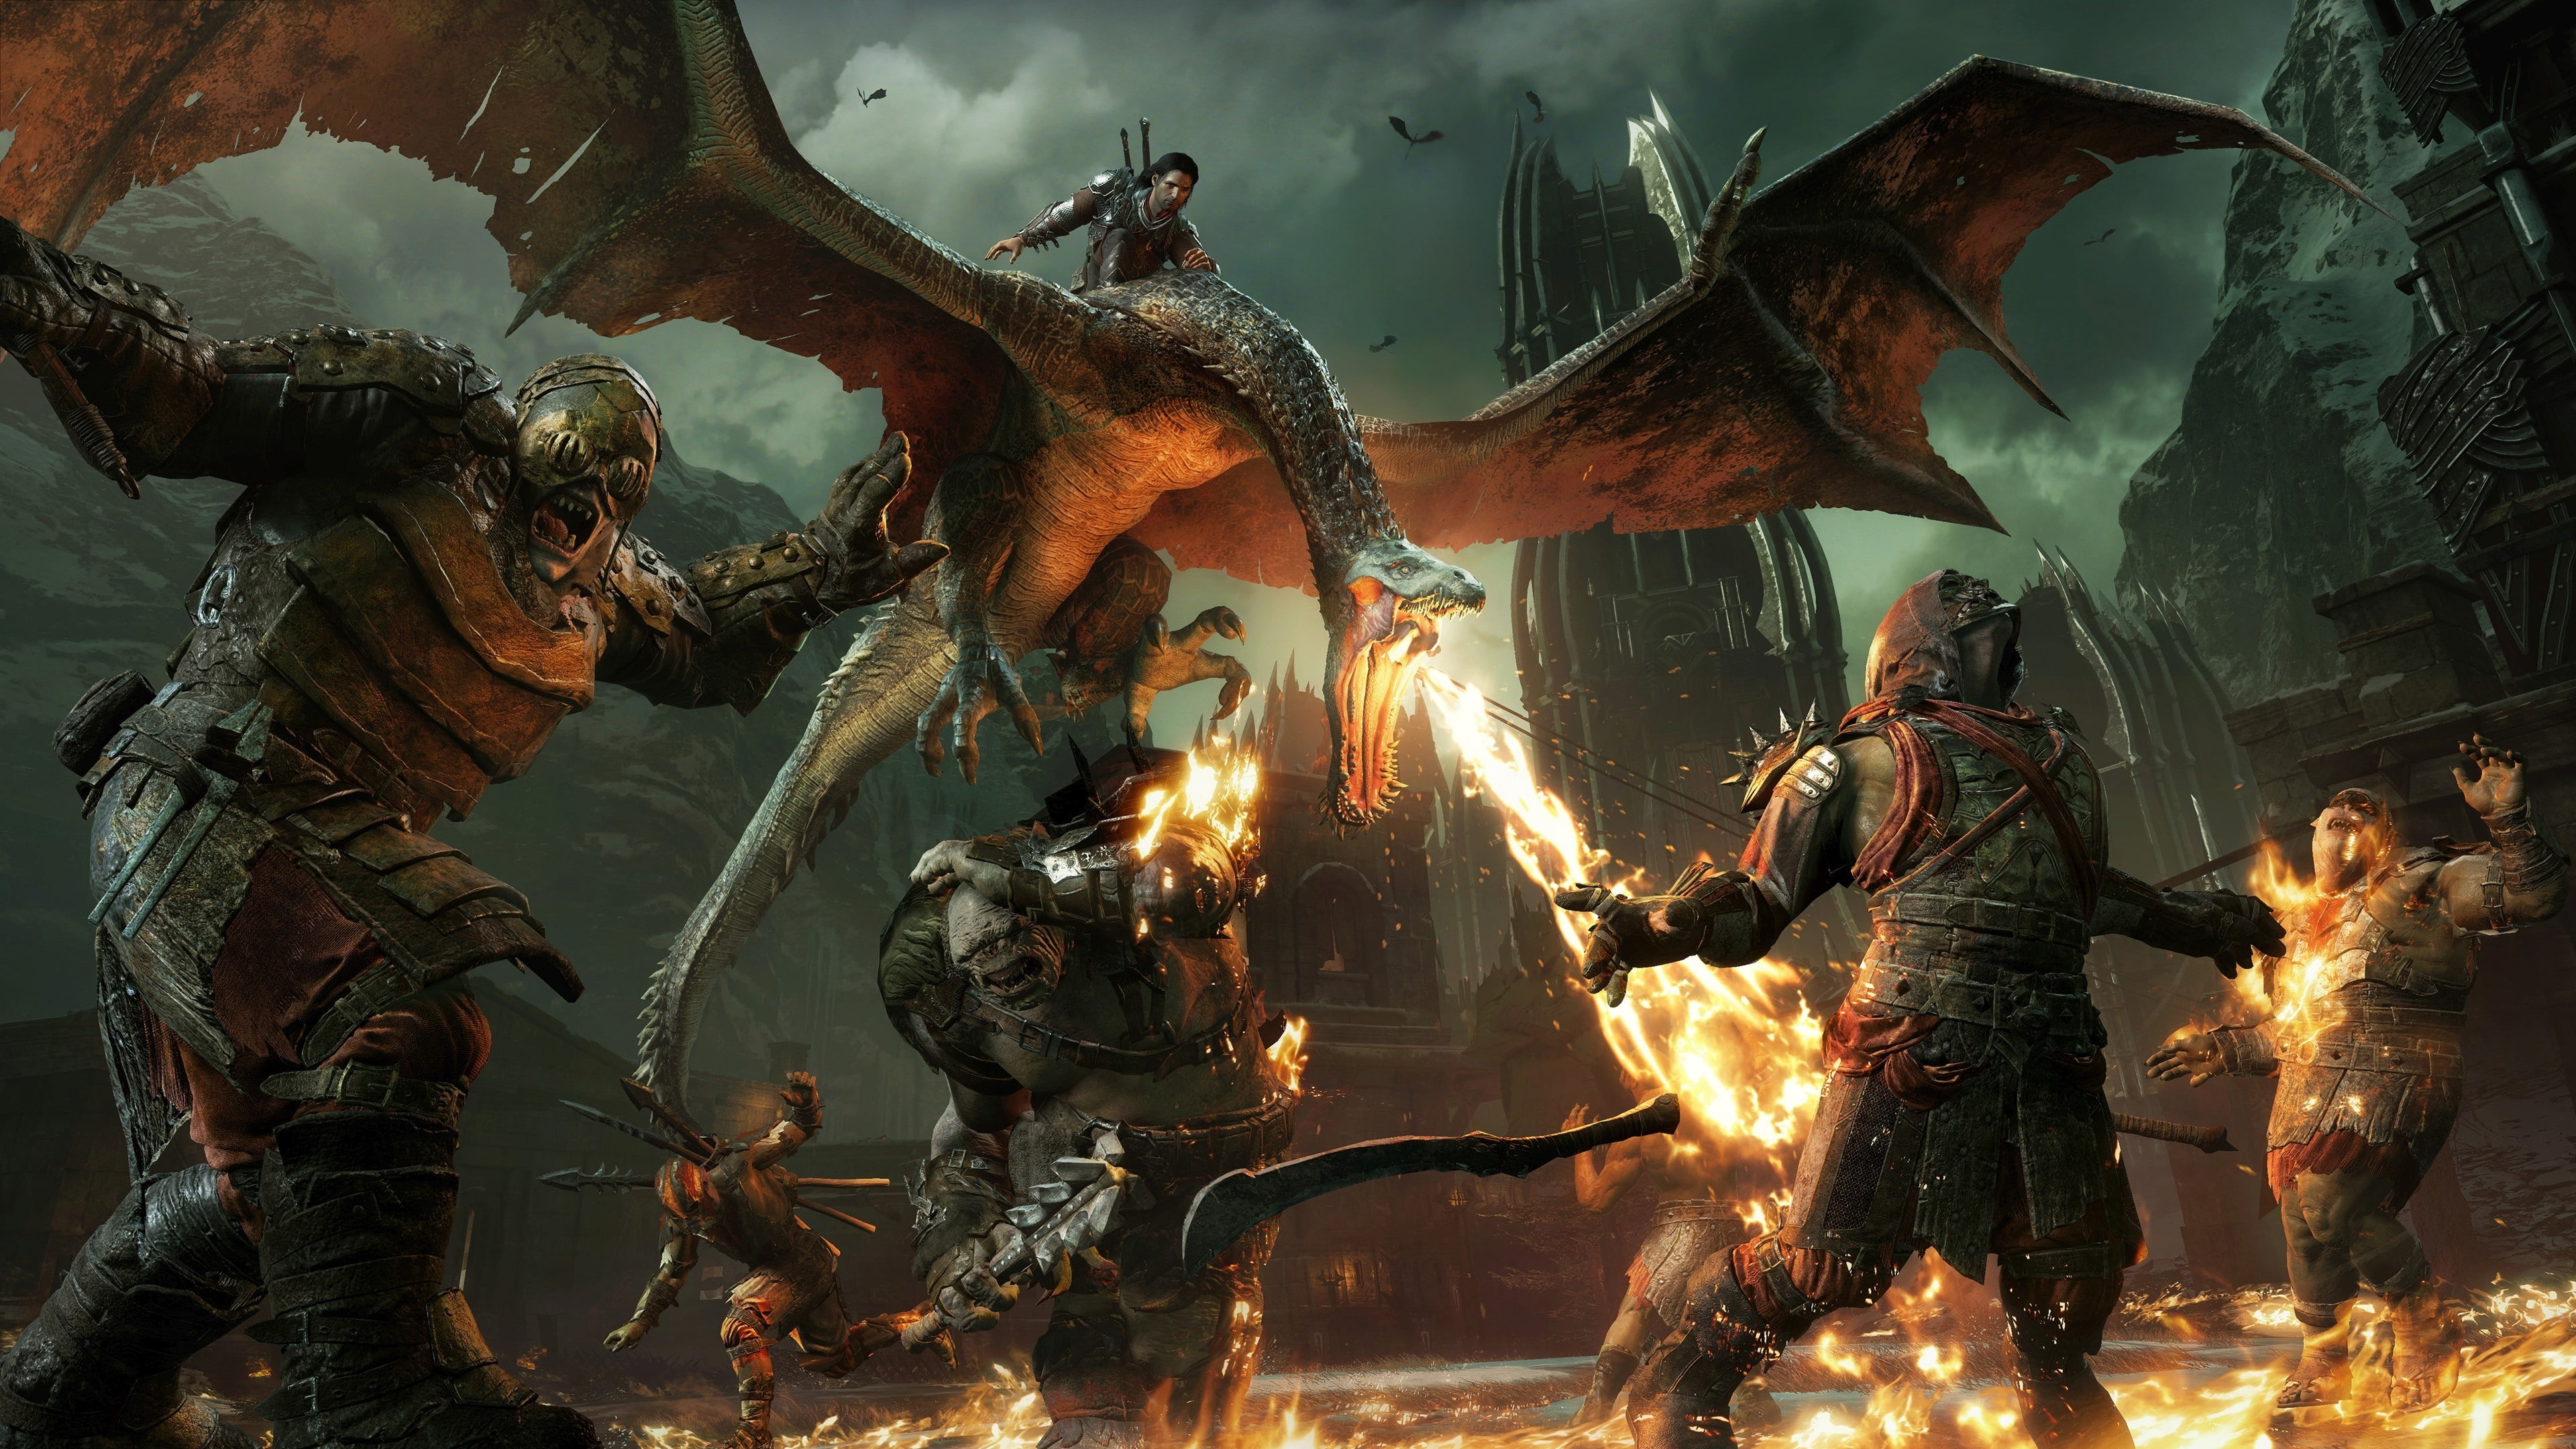 dragon breathing fire over knights video game illustration, Middle-earth: Shadow of War